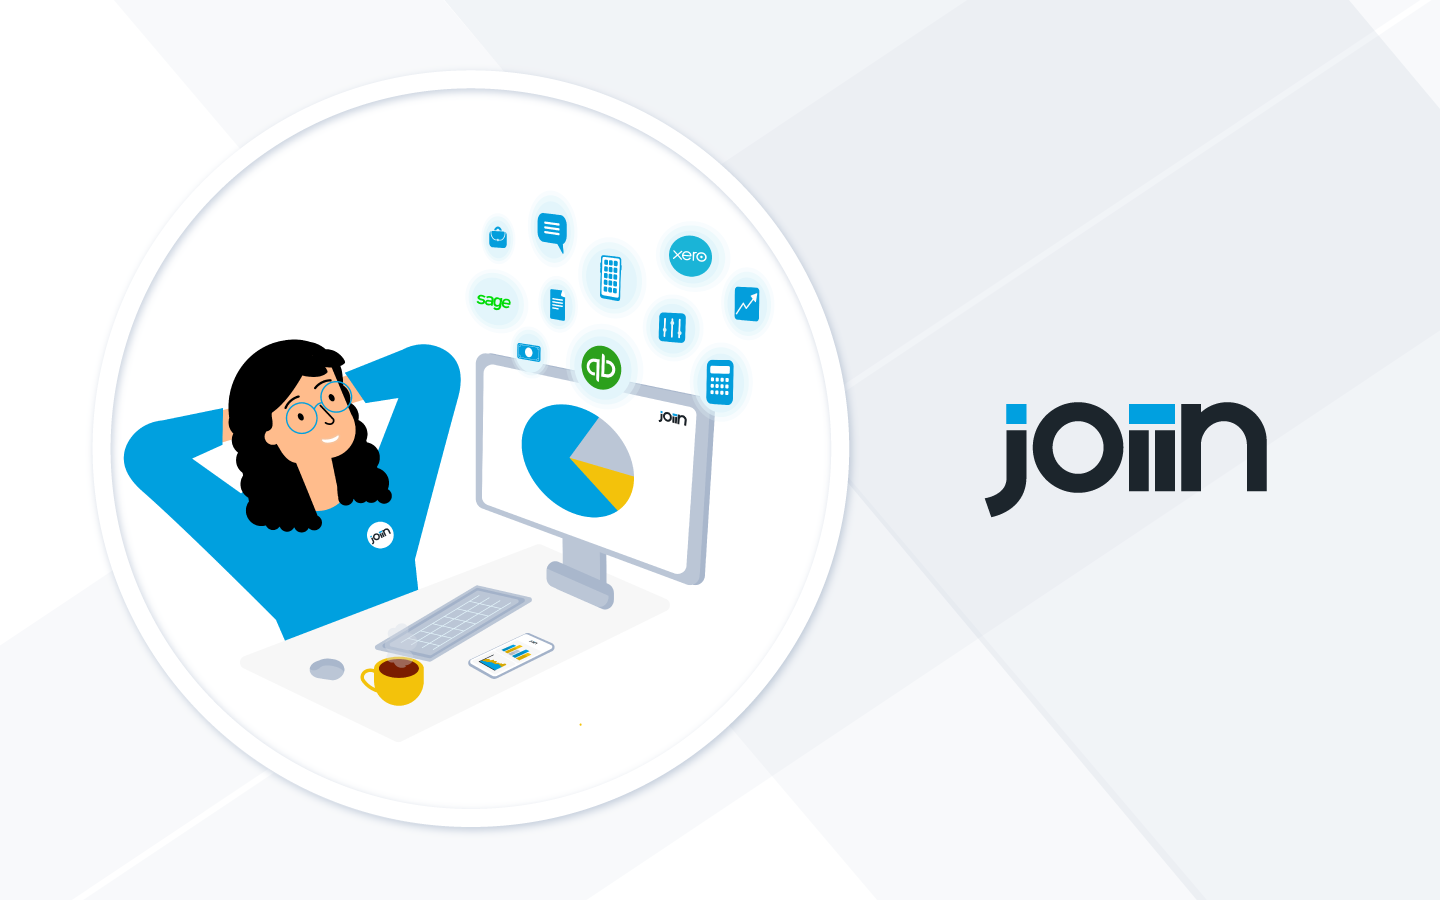 Joiin campaign targets solutions to common consolidated reporting headaches logo